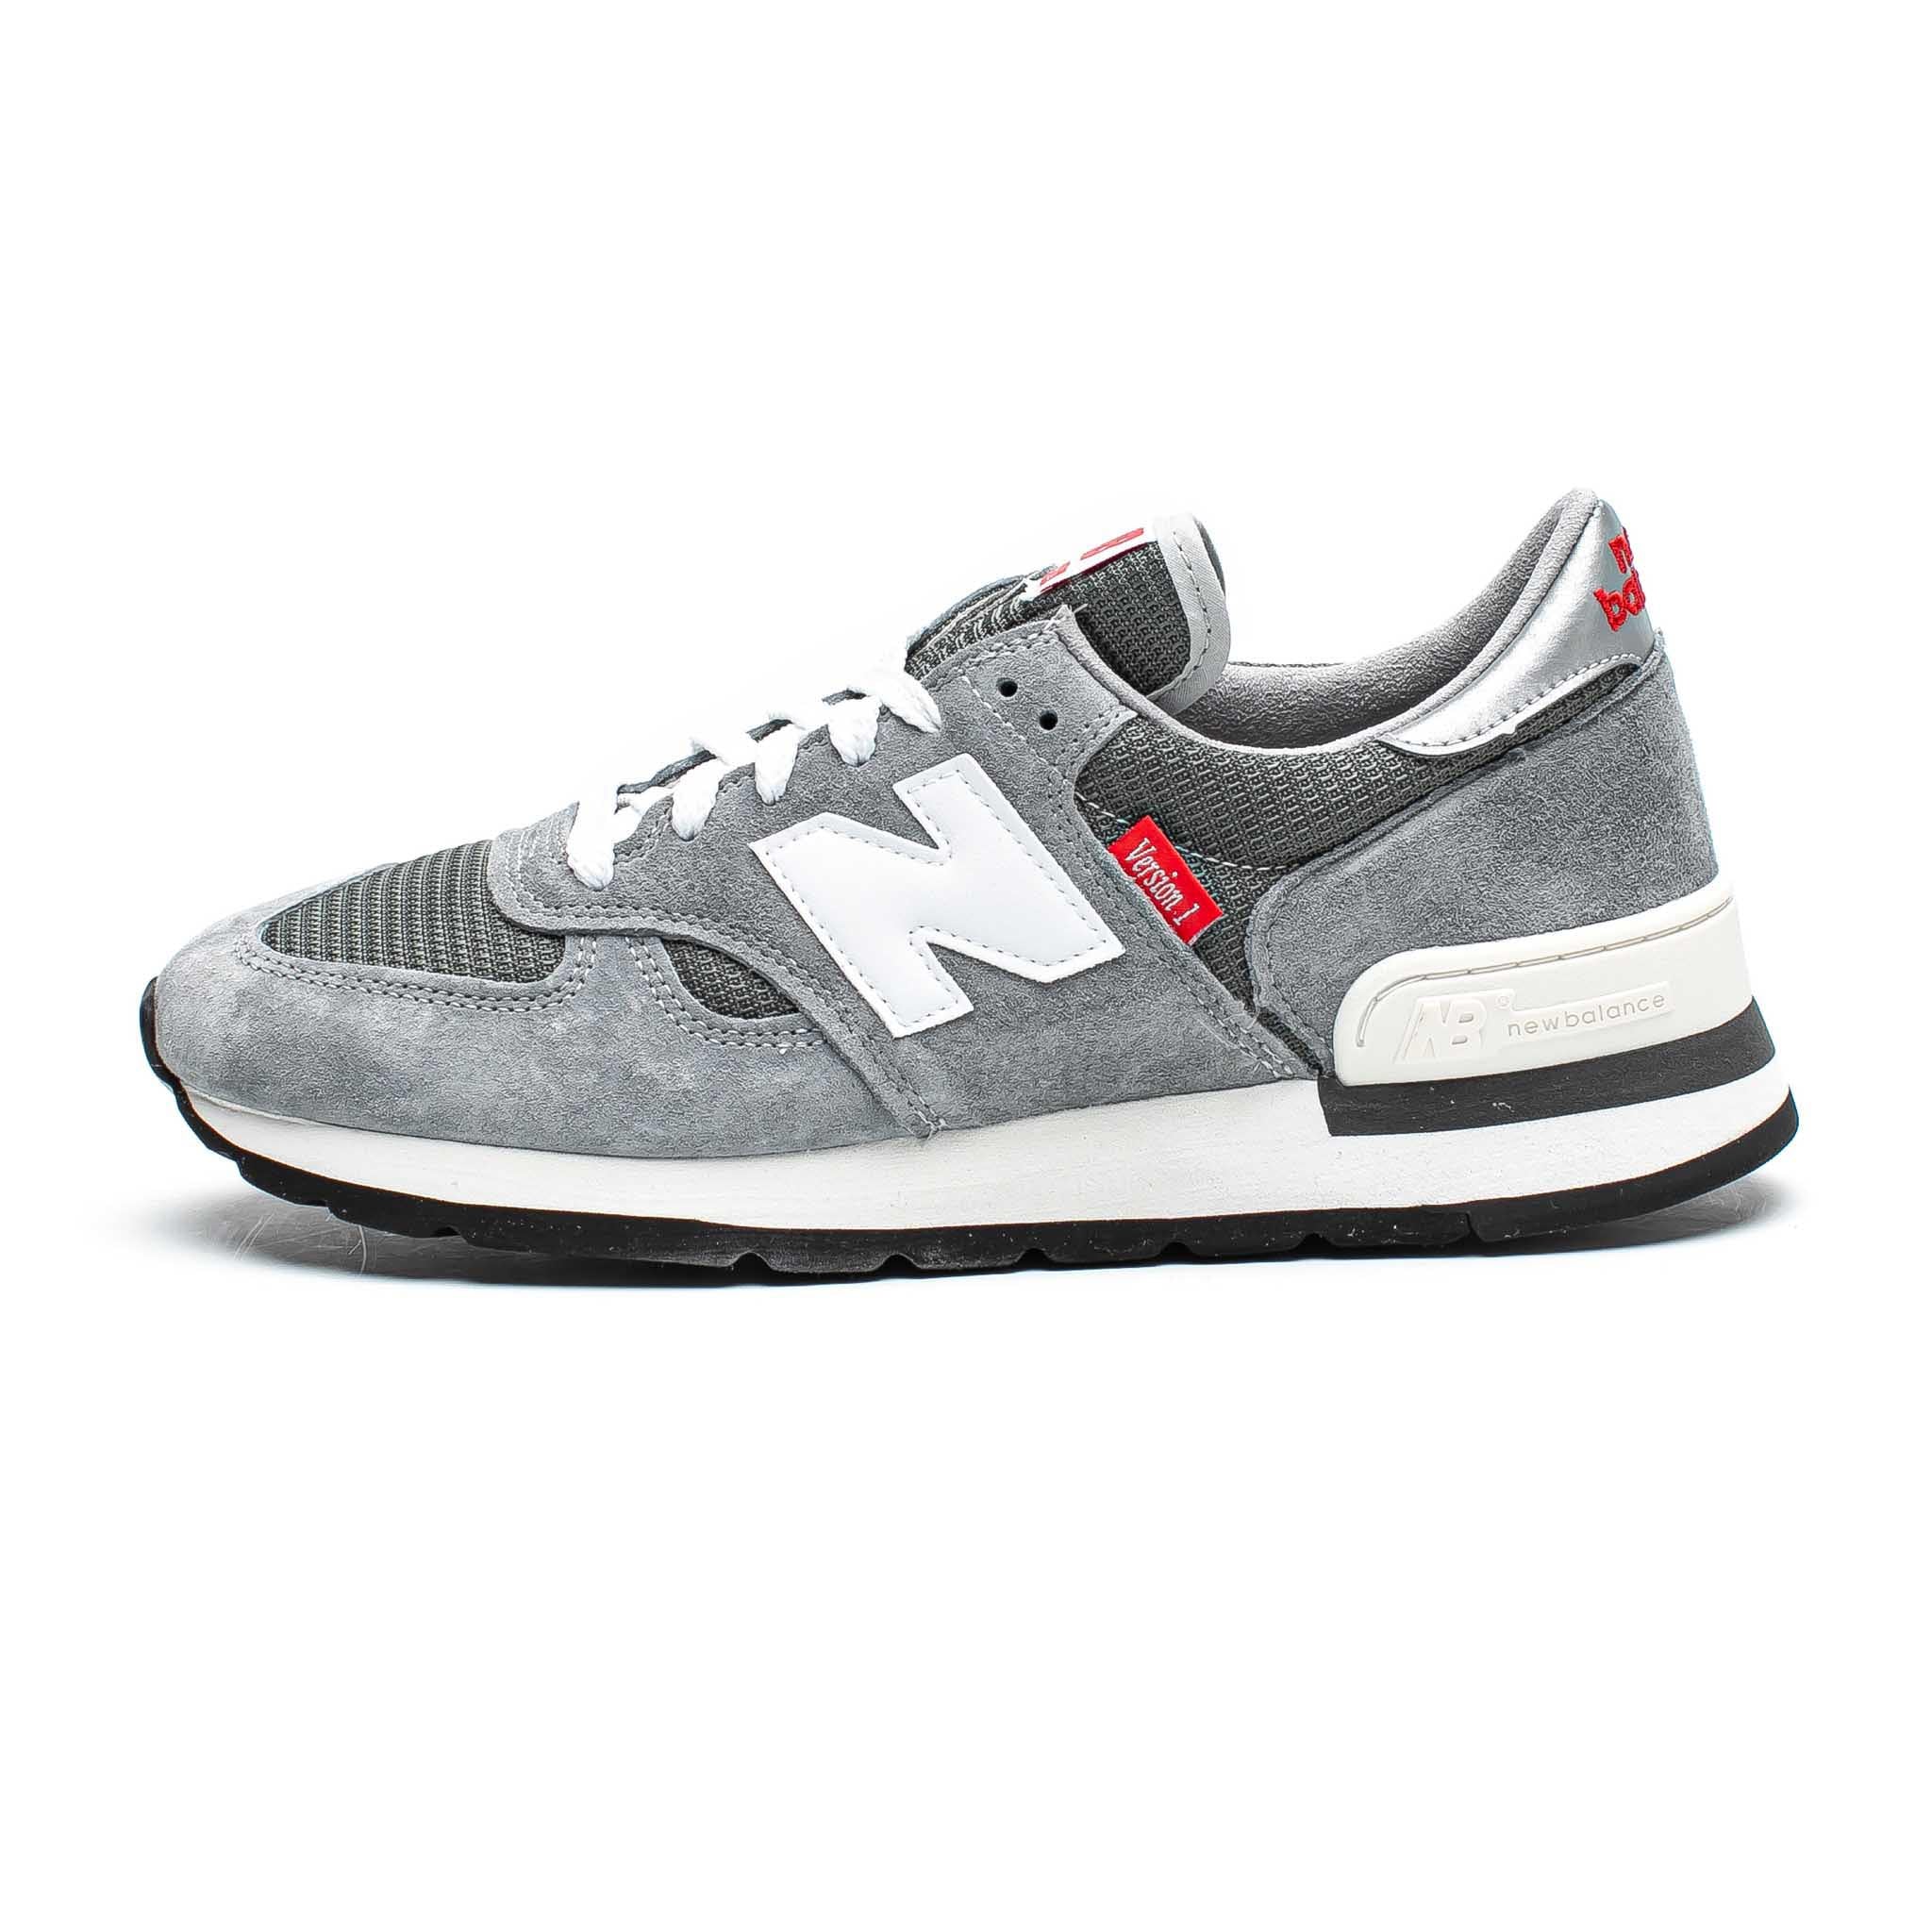 New Balance 'Made in the USA' M990VS1 Grey